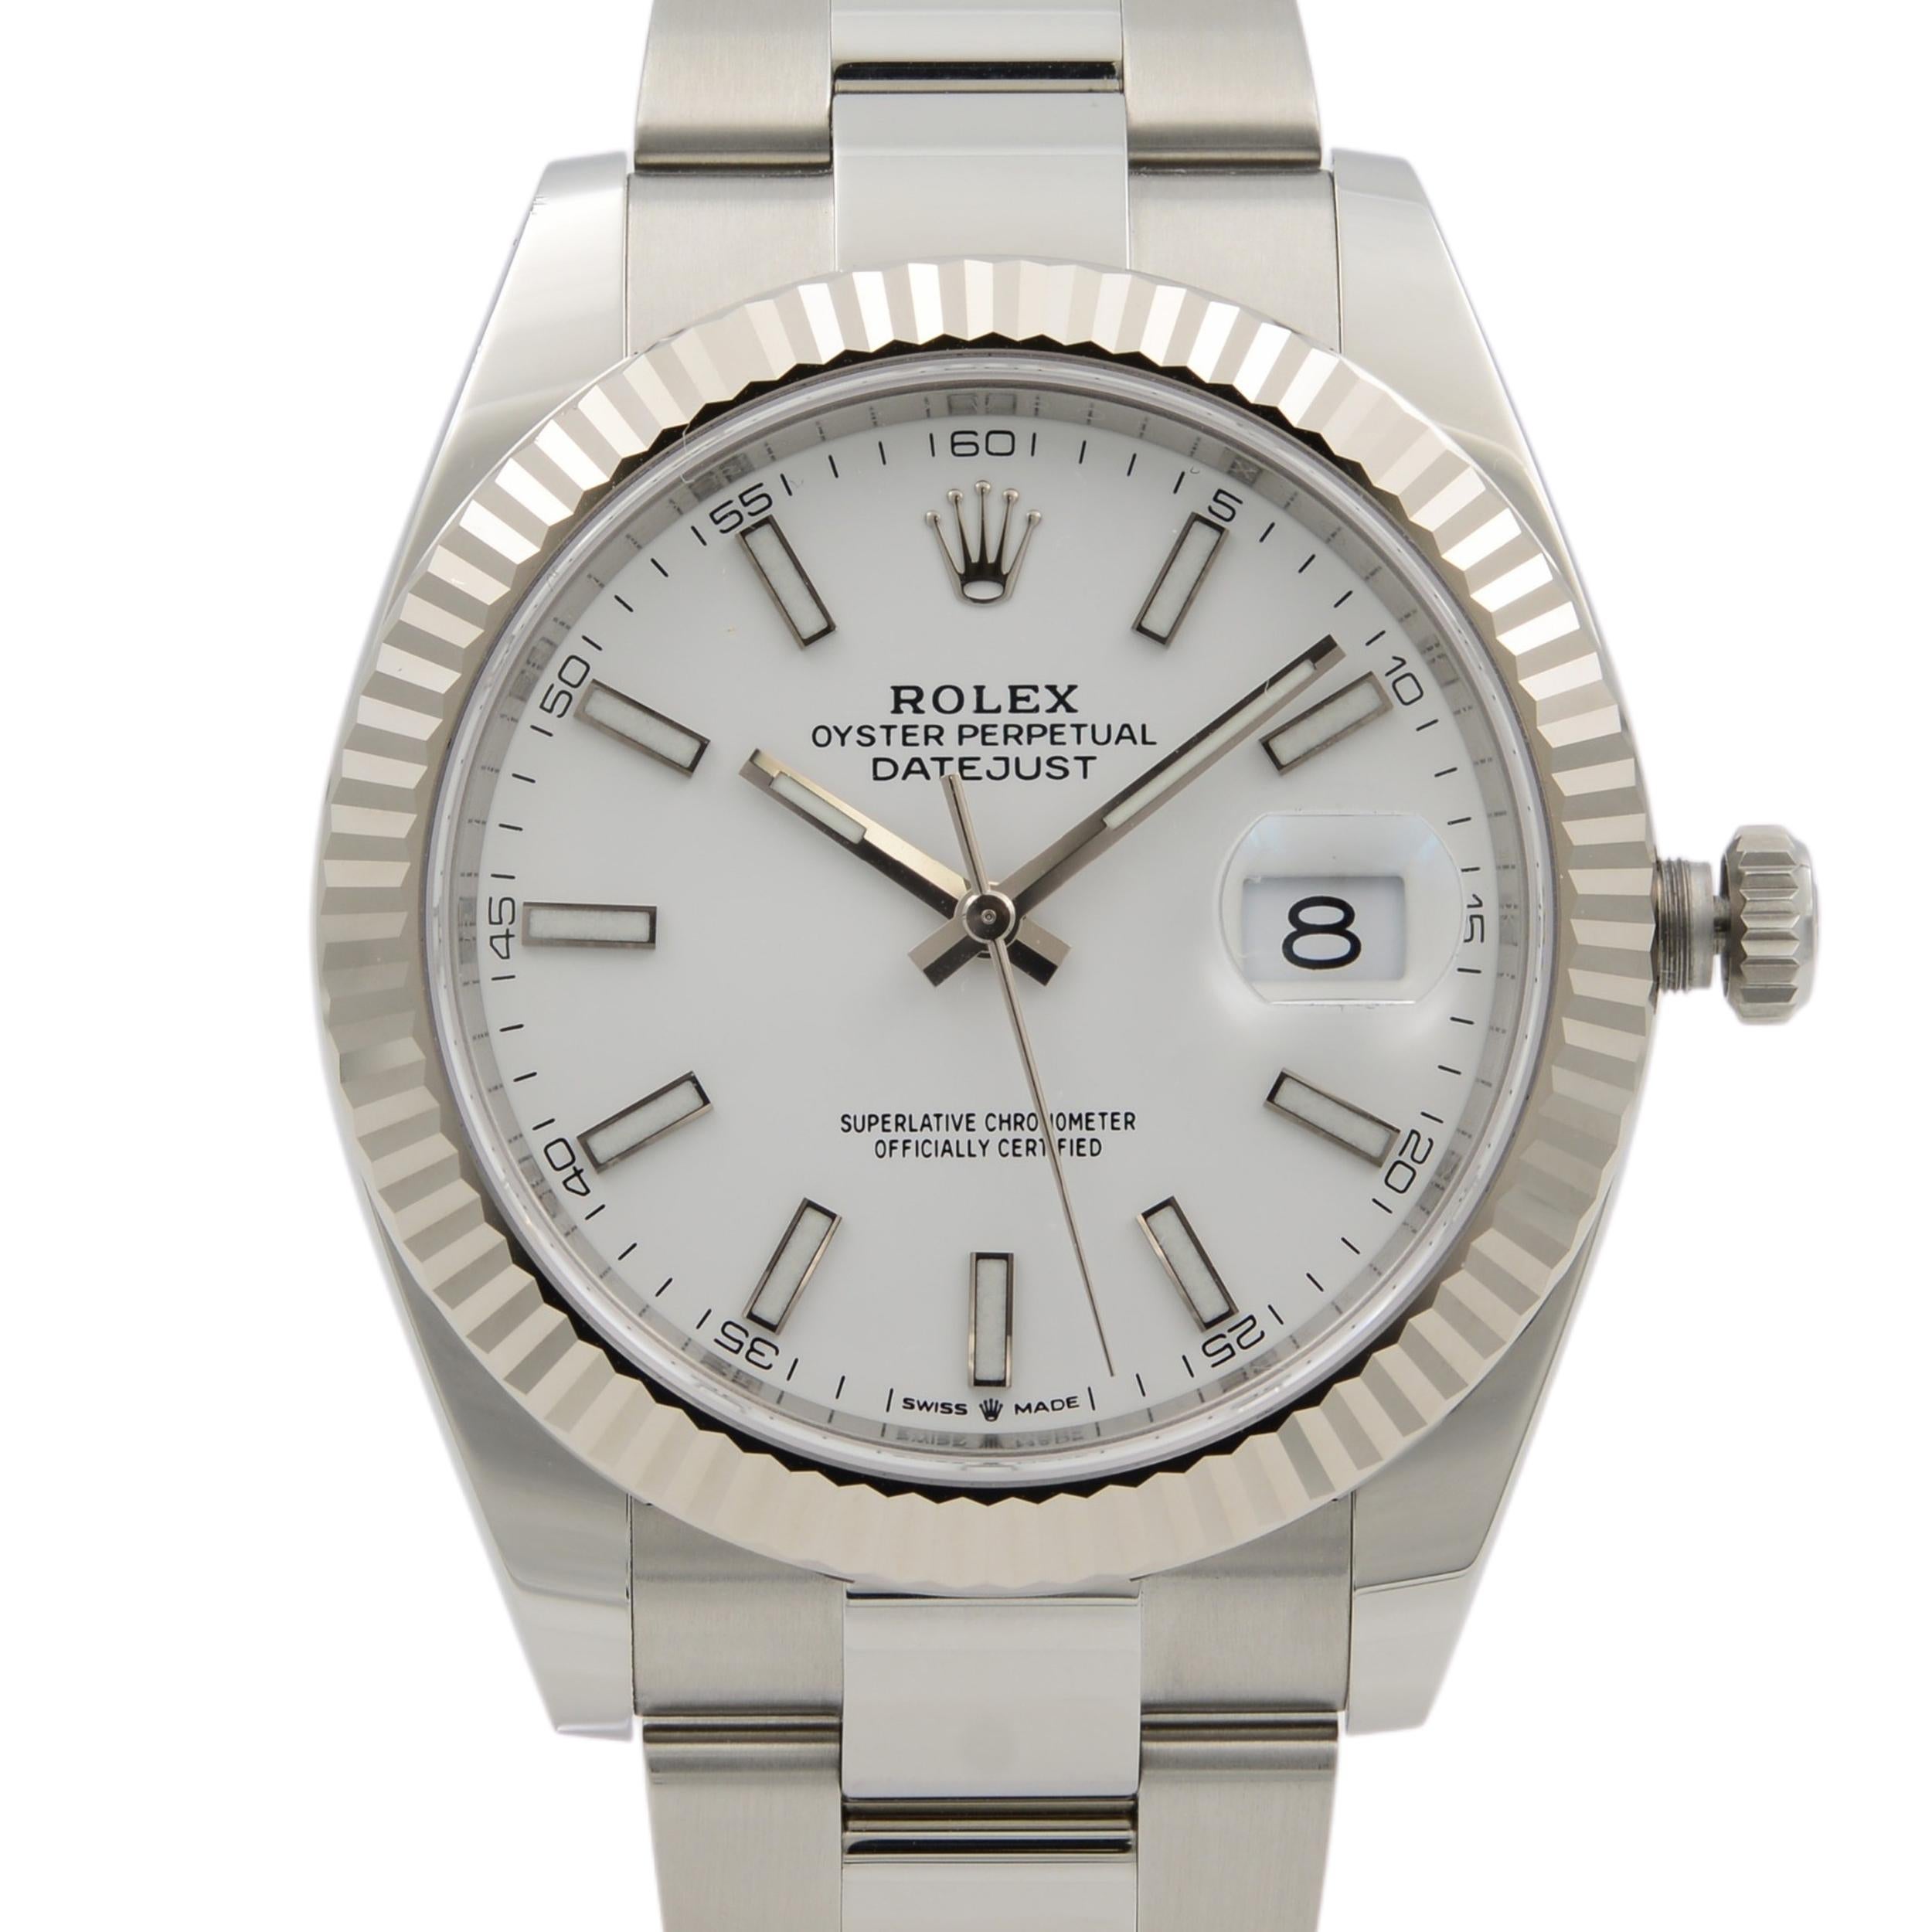 Unworn. The original box and papers.

Details:
Brand Rolex
Department Men
Model Number 126334
Country/Region of Manufacture Switzerland
Model Rolex Datejust 126334
Style Dress/Formal, Luxury
Movement Mechanical (Automatic)
Band Color Steel
Band